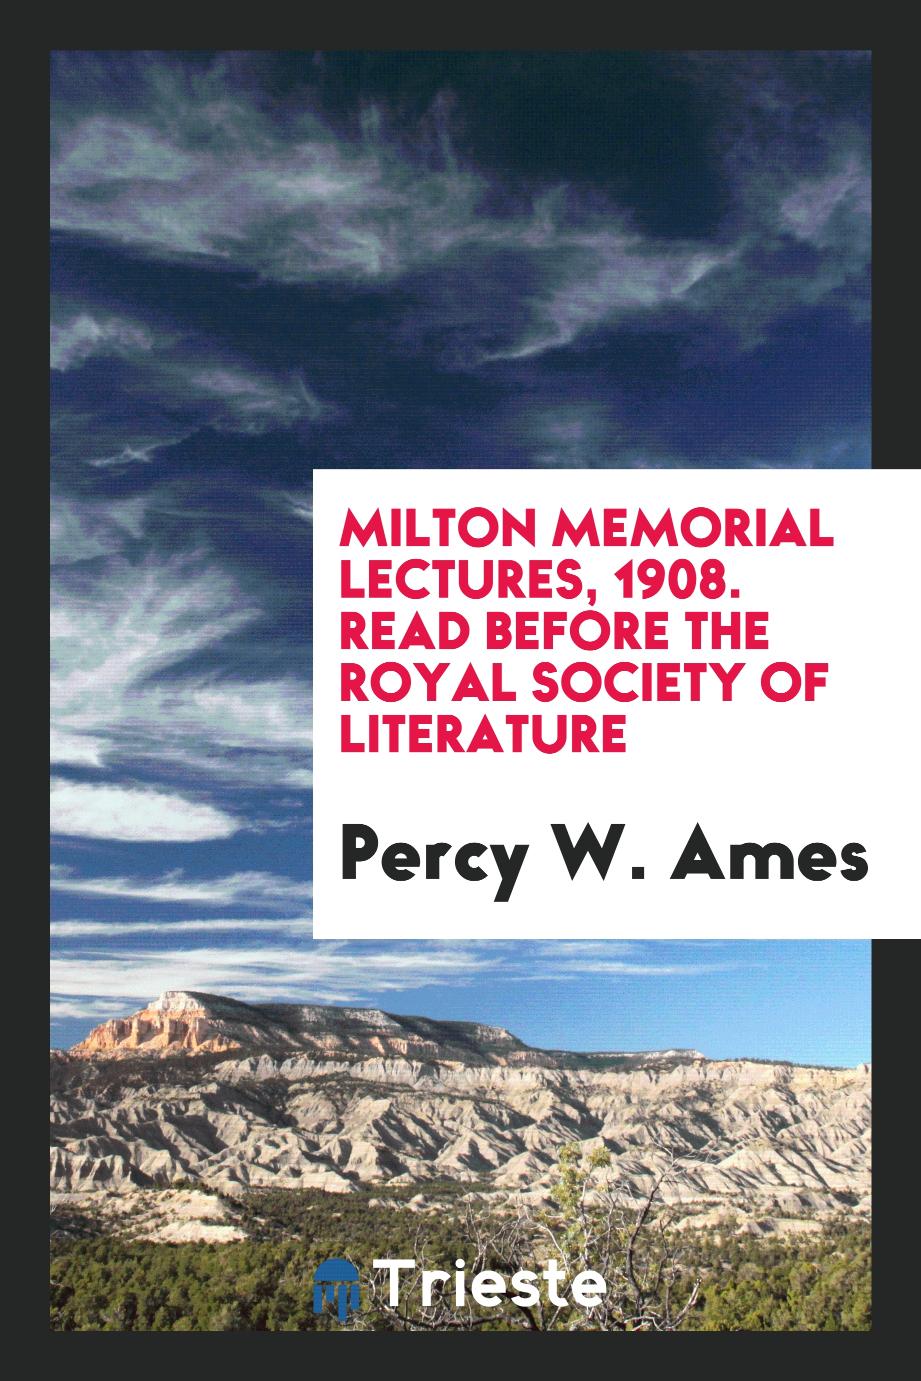 Milton memorial lectures, 1908. Read before the Royal Society of Literature